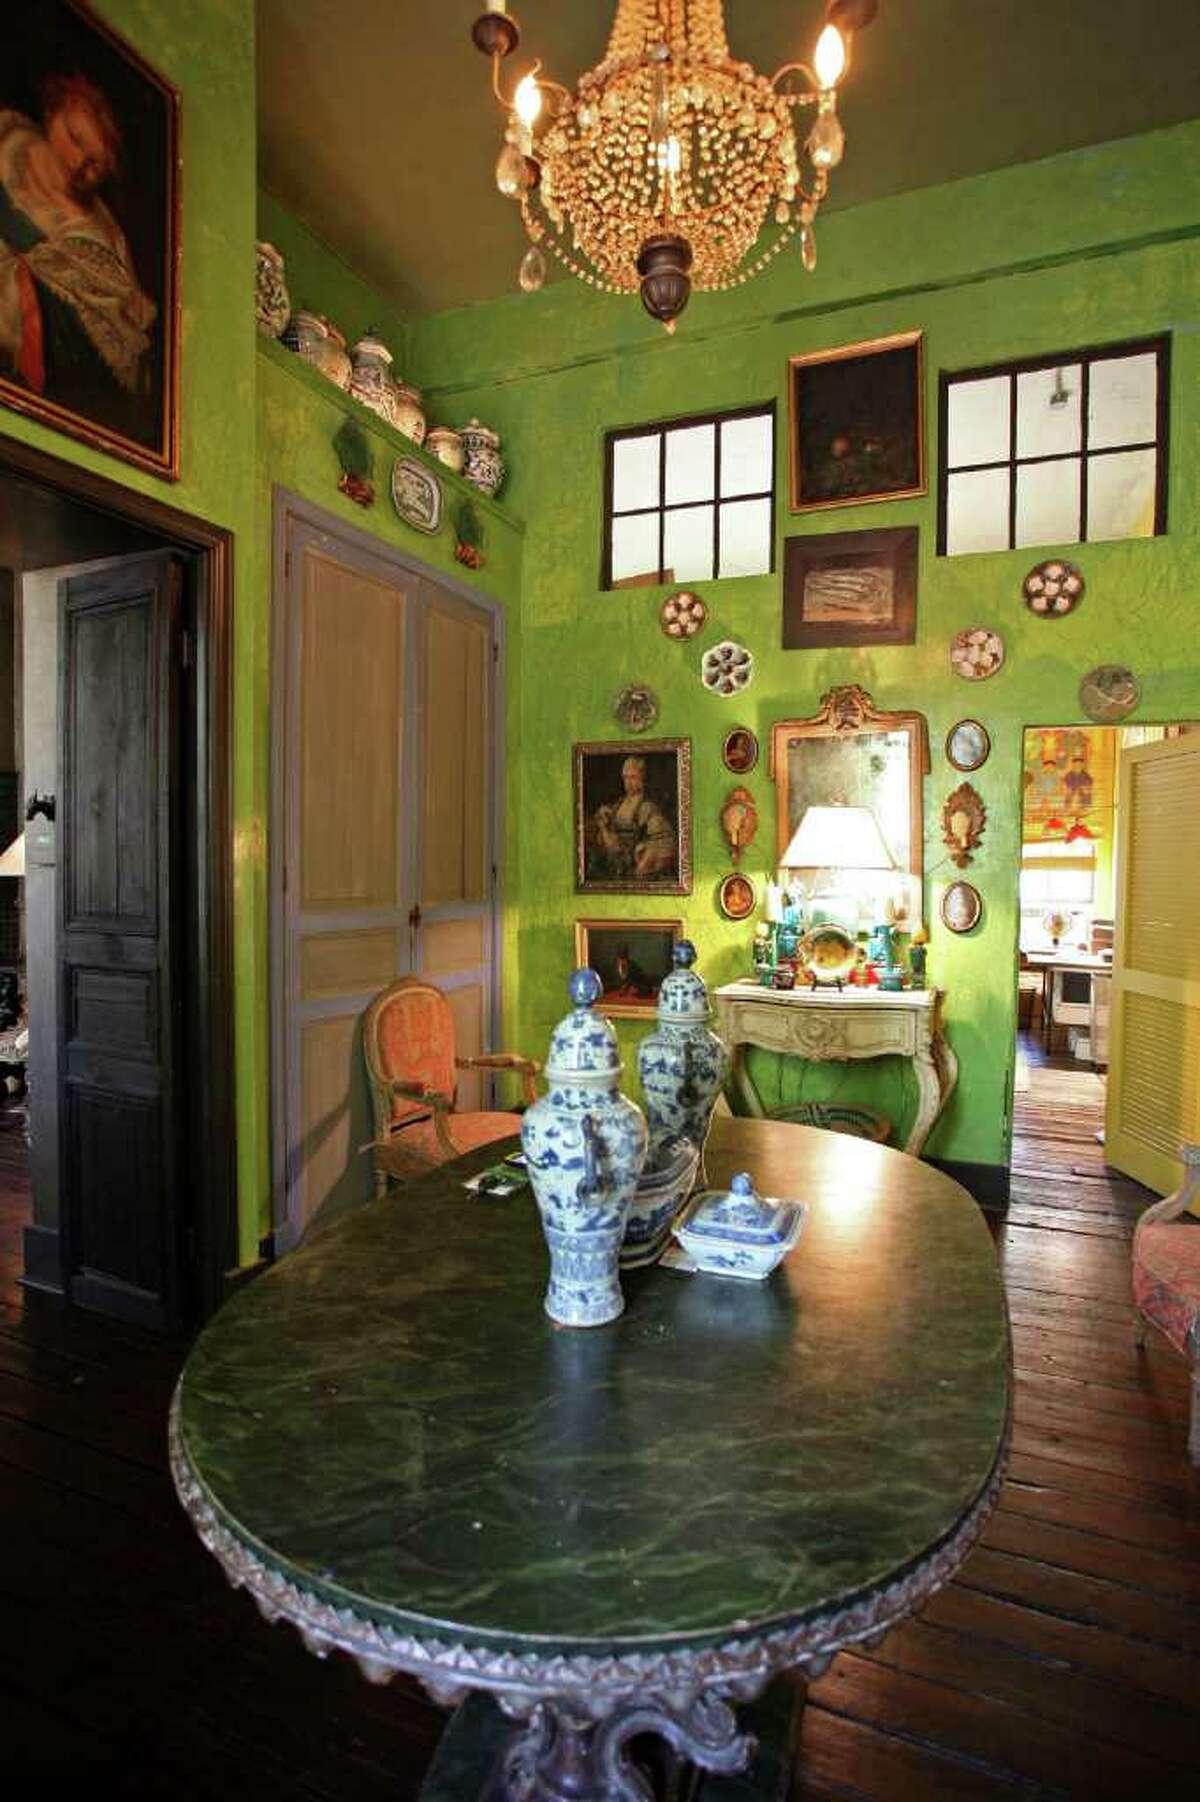 Griffith had her son paint the entry sour apple green. She found the green doors trimmed in purple in Los Angeles and had them shipped home and built around them. Art, dishes and pottery are displayed in the entry.